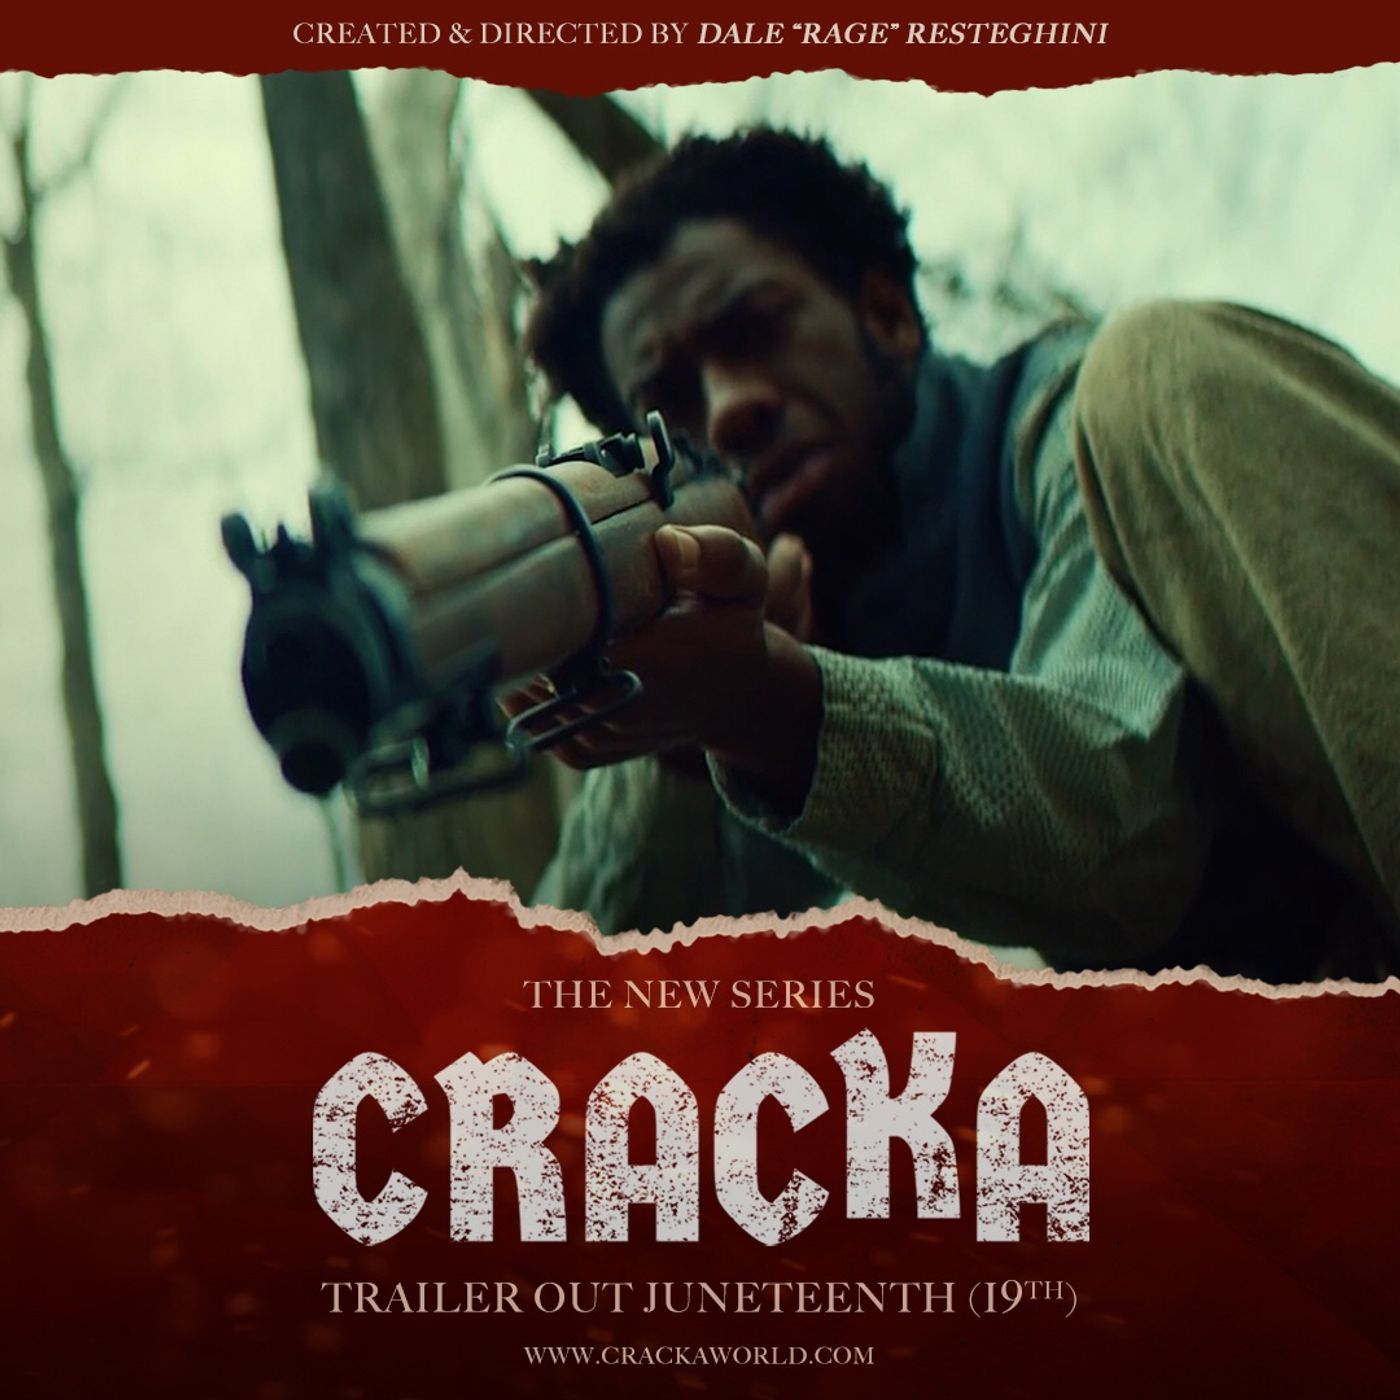 Cracka: Puts Blacks as Slave Owners and Whites as Slaves